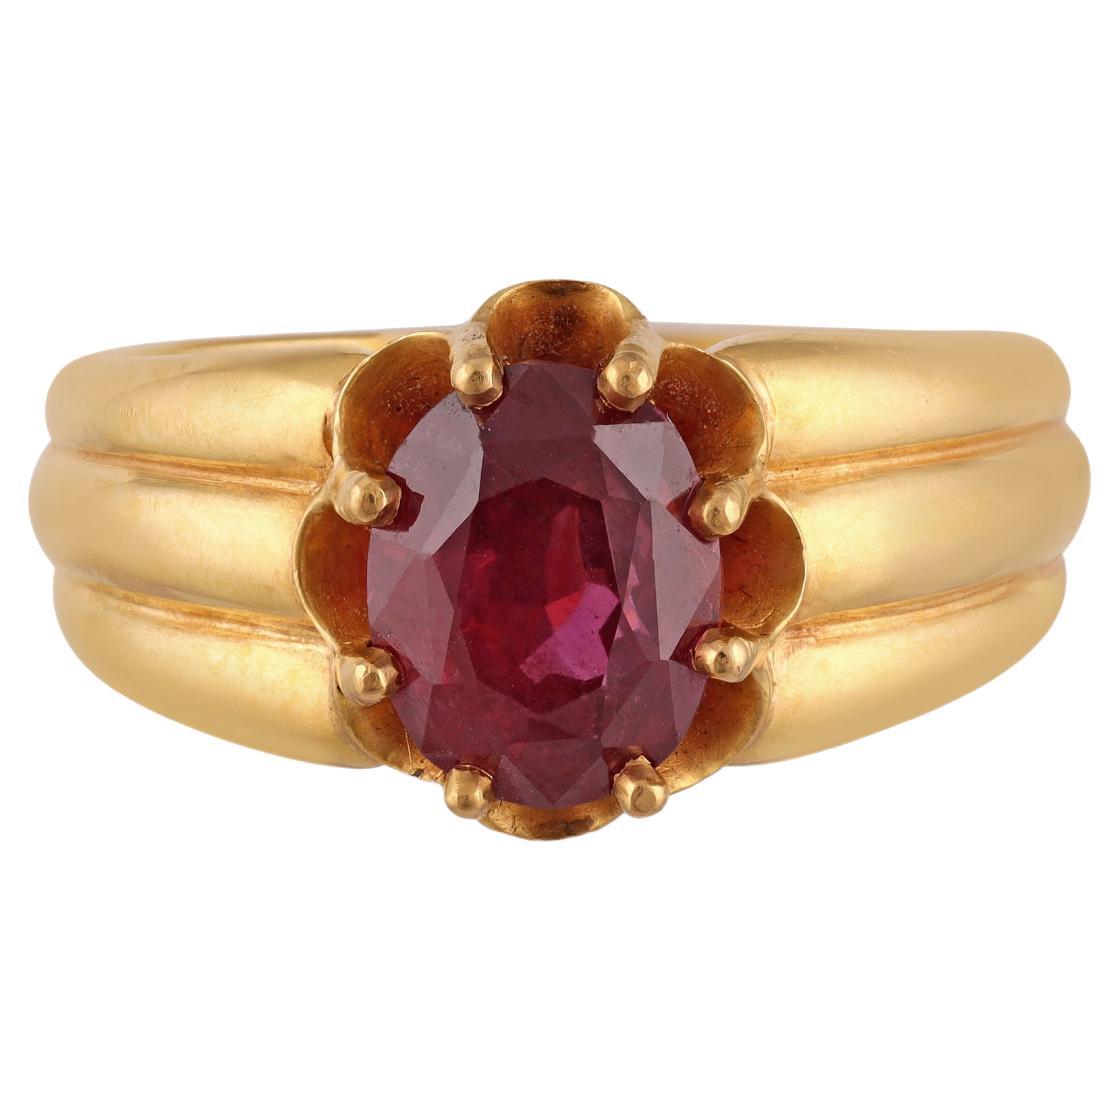 Royal Handcrafted Natural Mozambique Ruby Ring in 22k Gold 